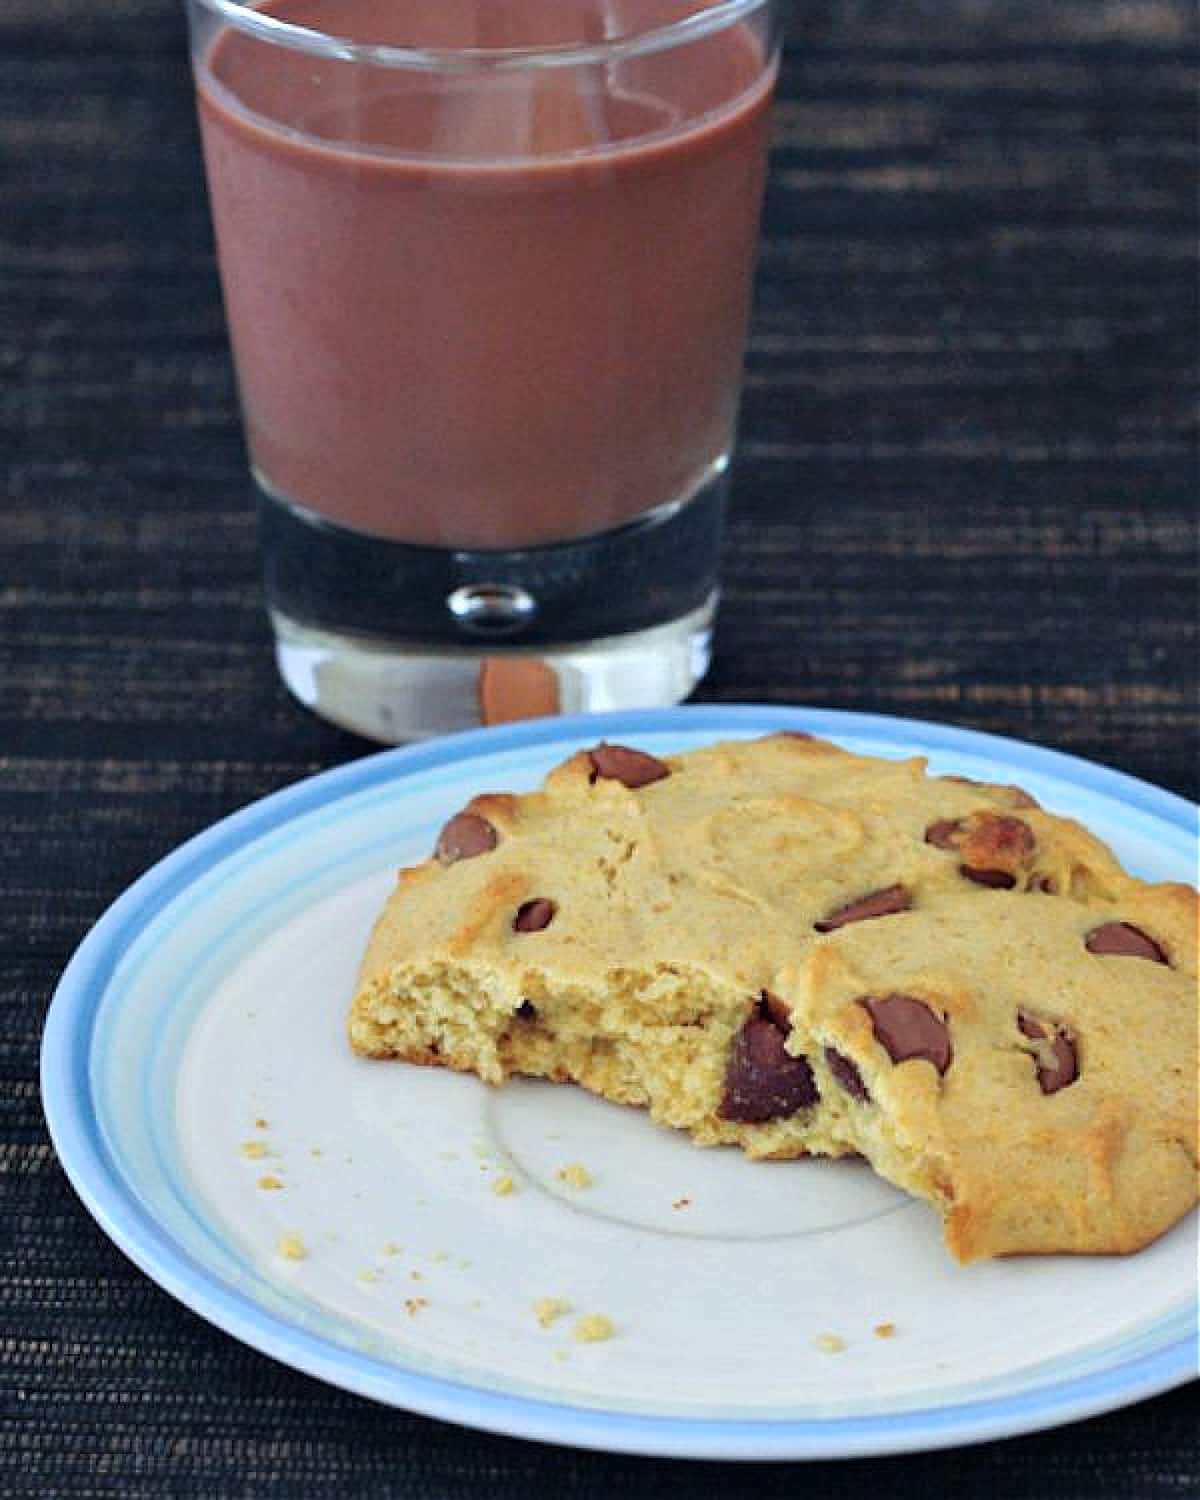 A single serve chocolate chip cookie with a bite out of it on a white plate. A short glass of chocolate milk sits next to the plate.